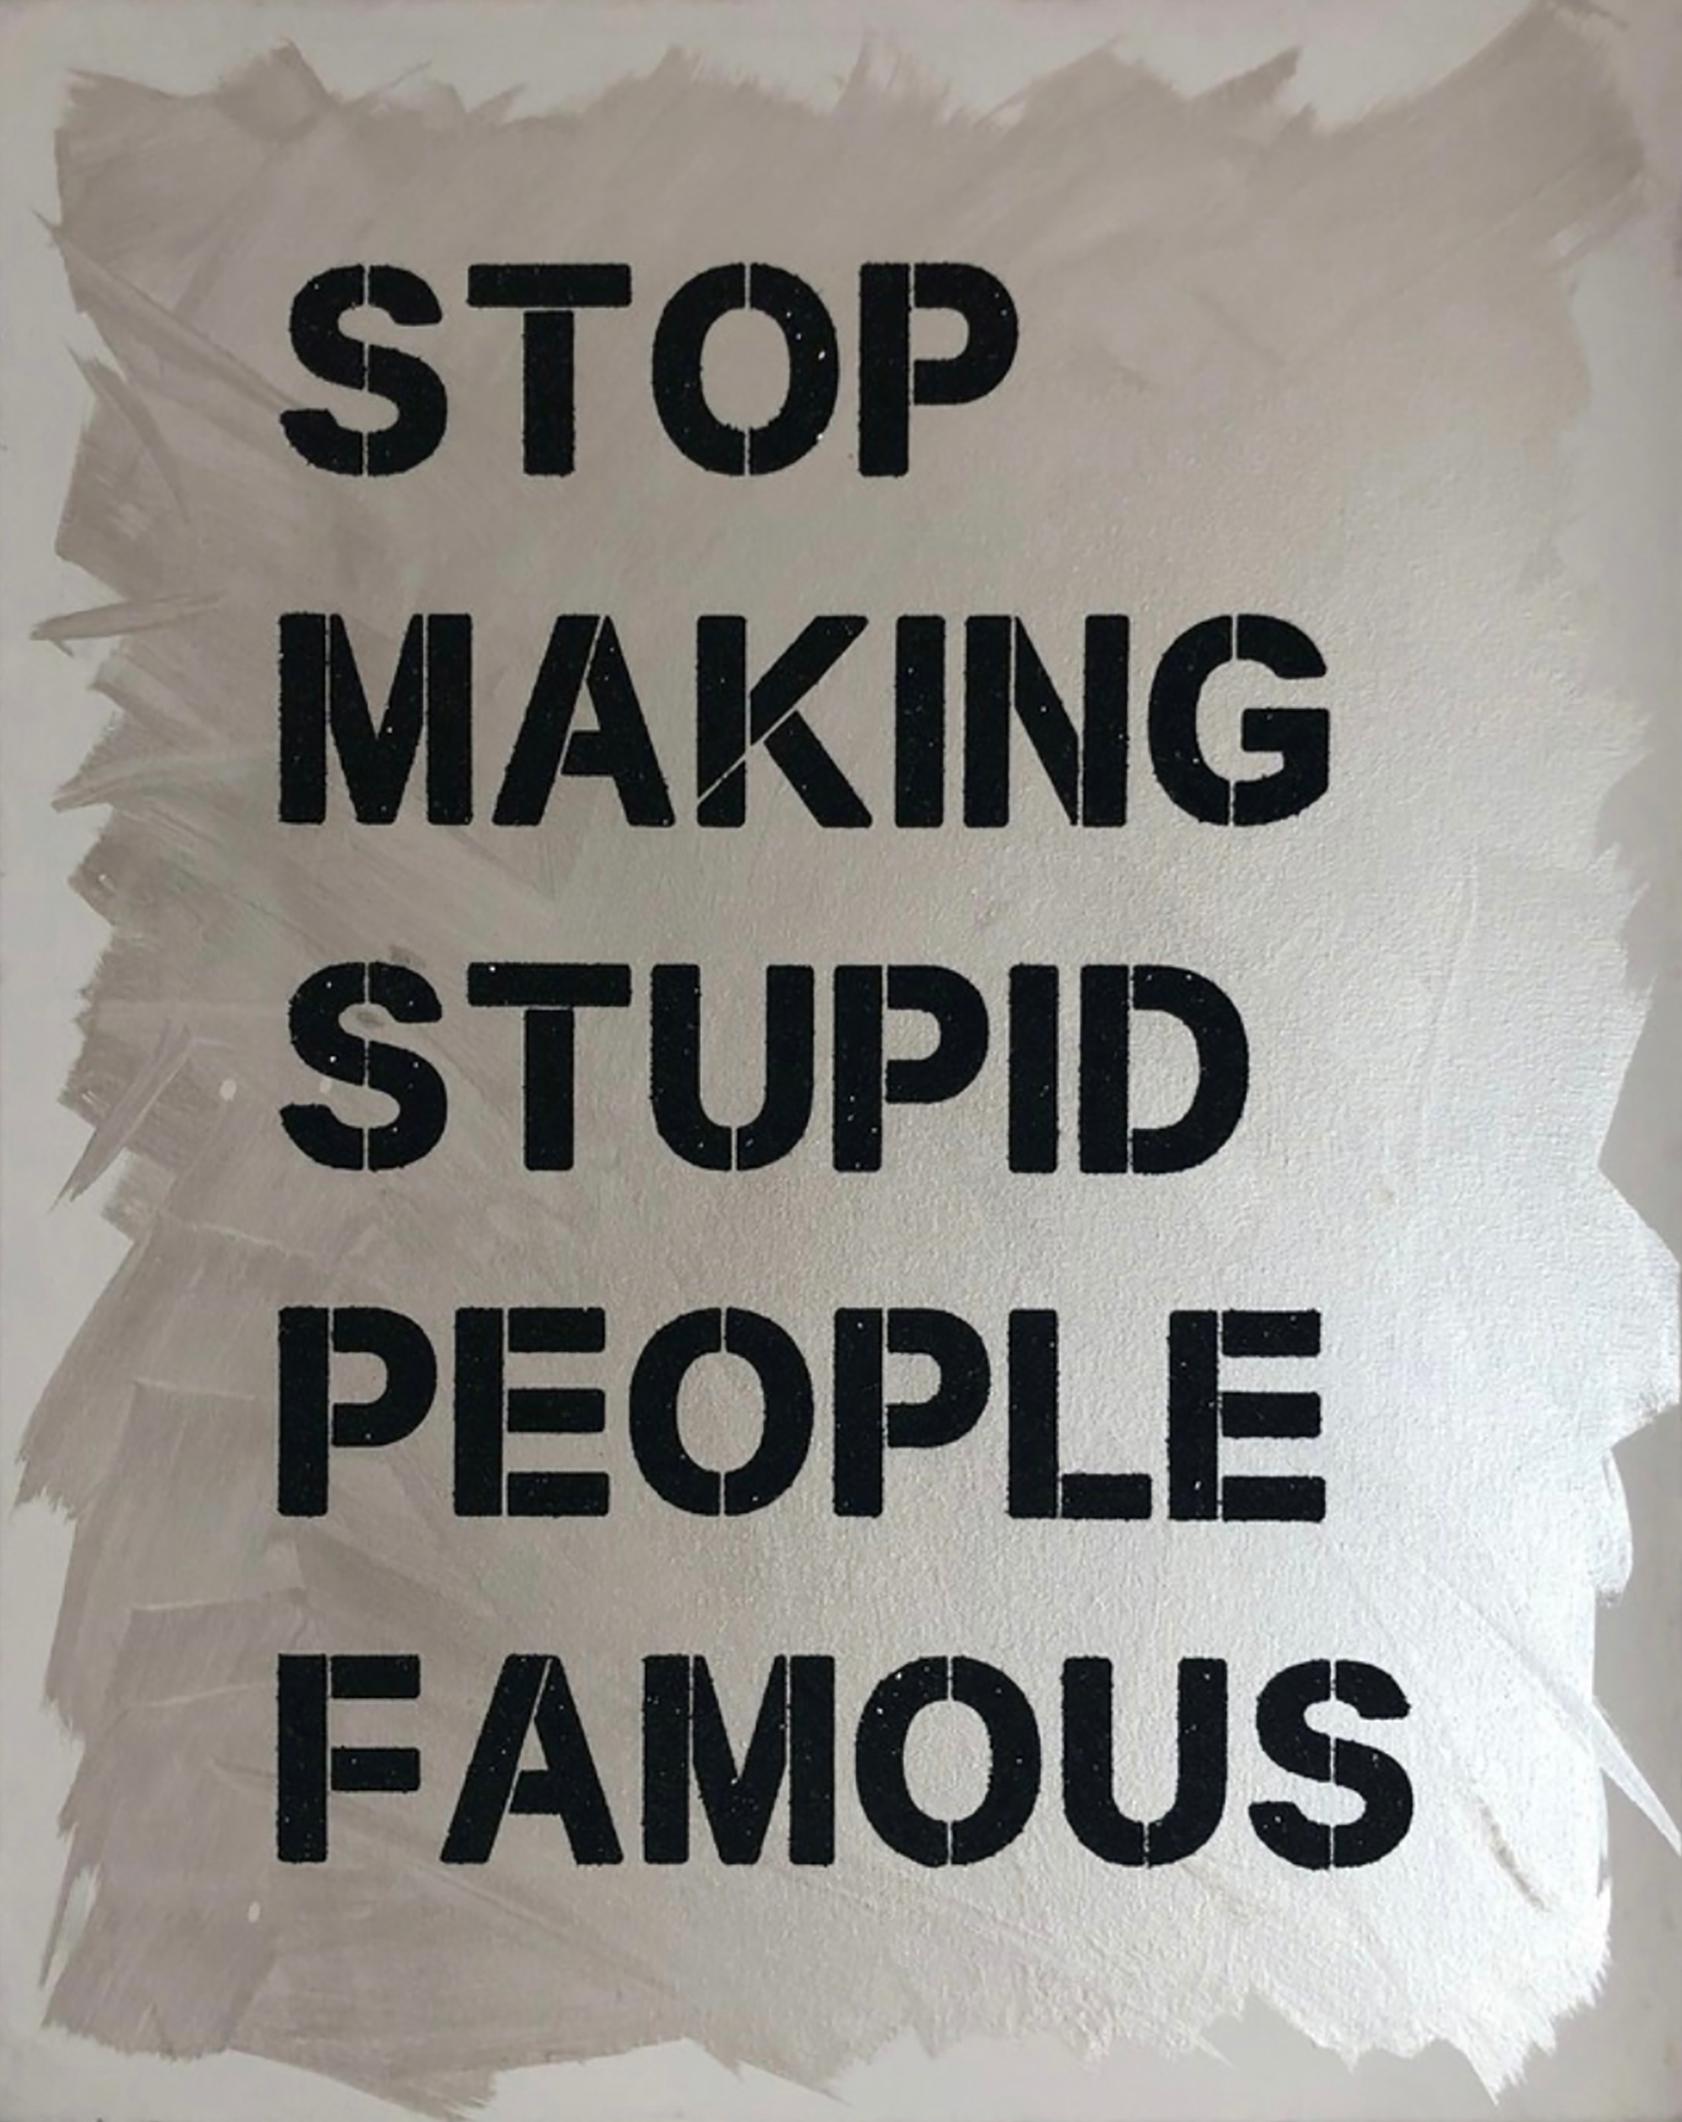 "Stop Making Stupid People Famous" Black Diamond Dust Stenciled on Canvas - Mixed Media Art by Plastic Jesus